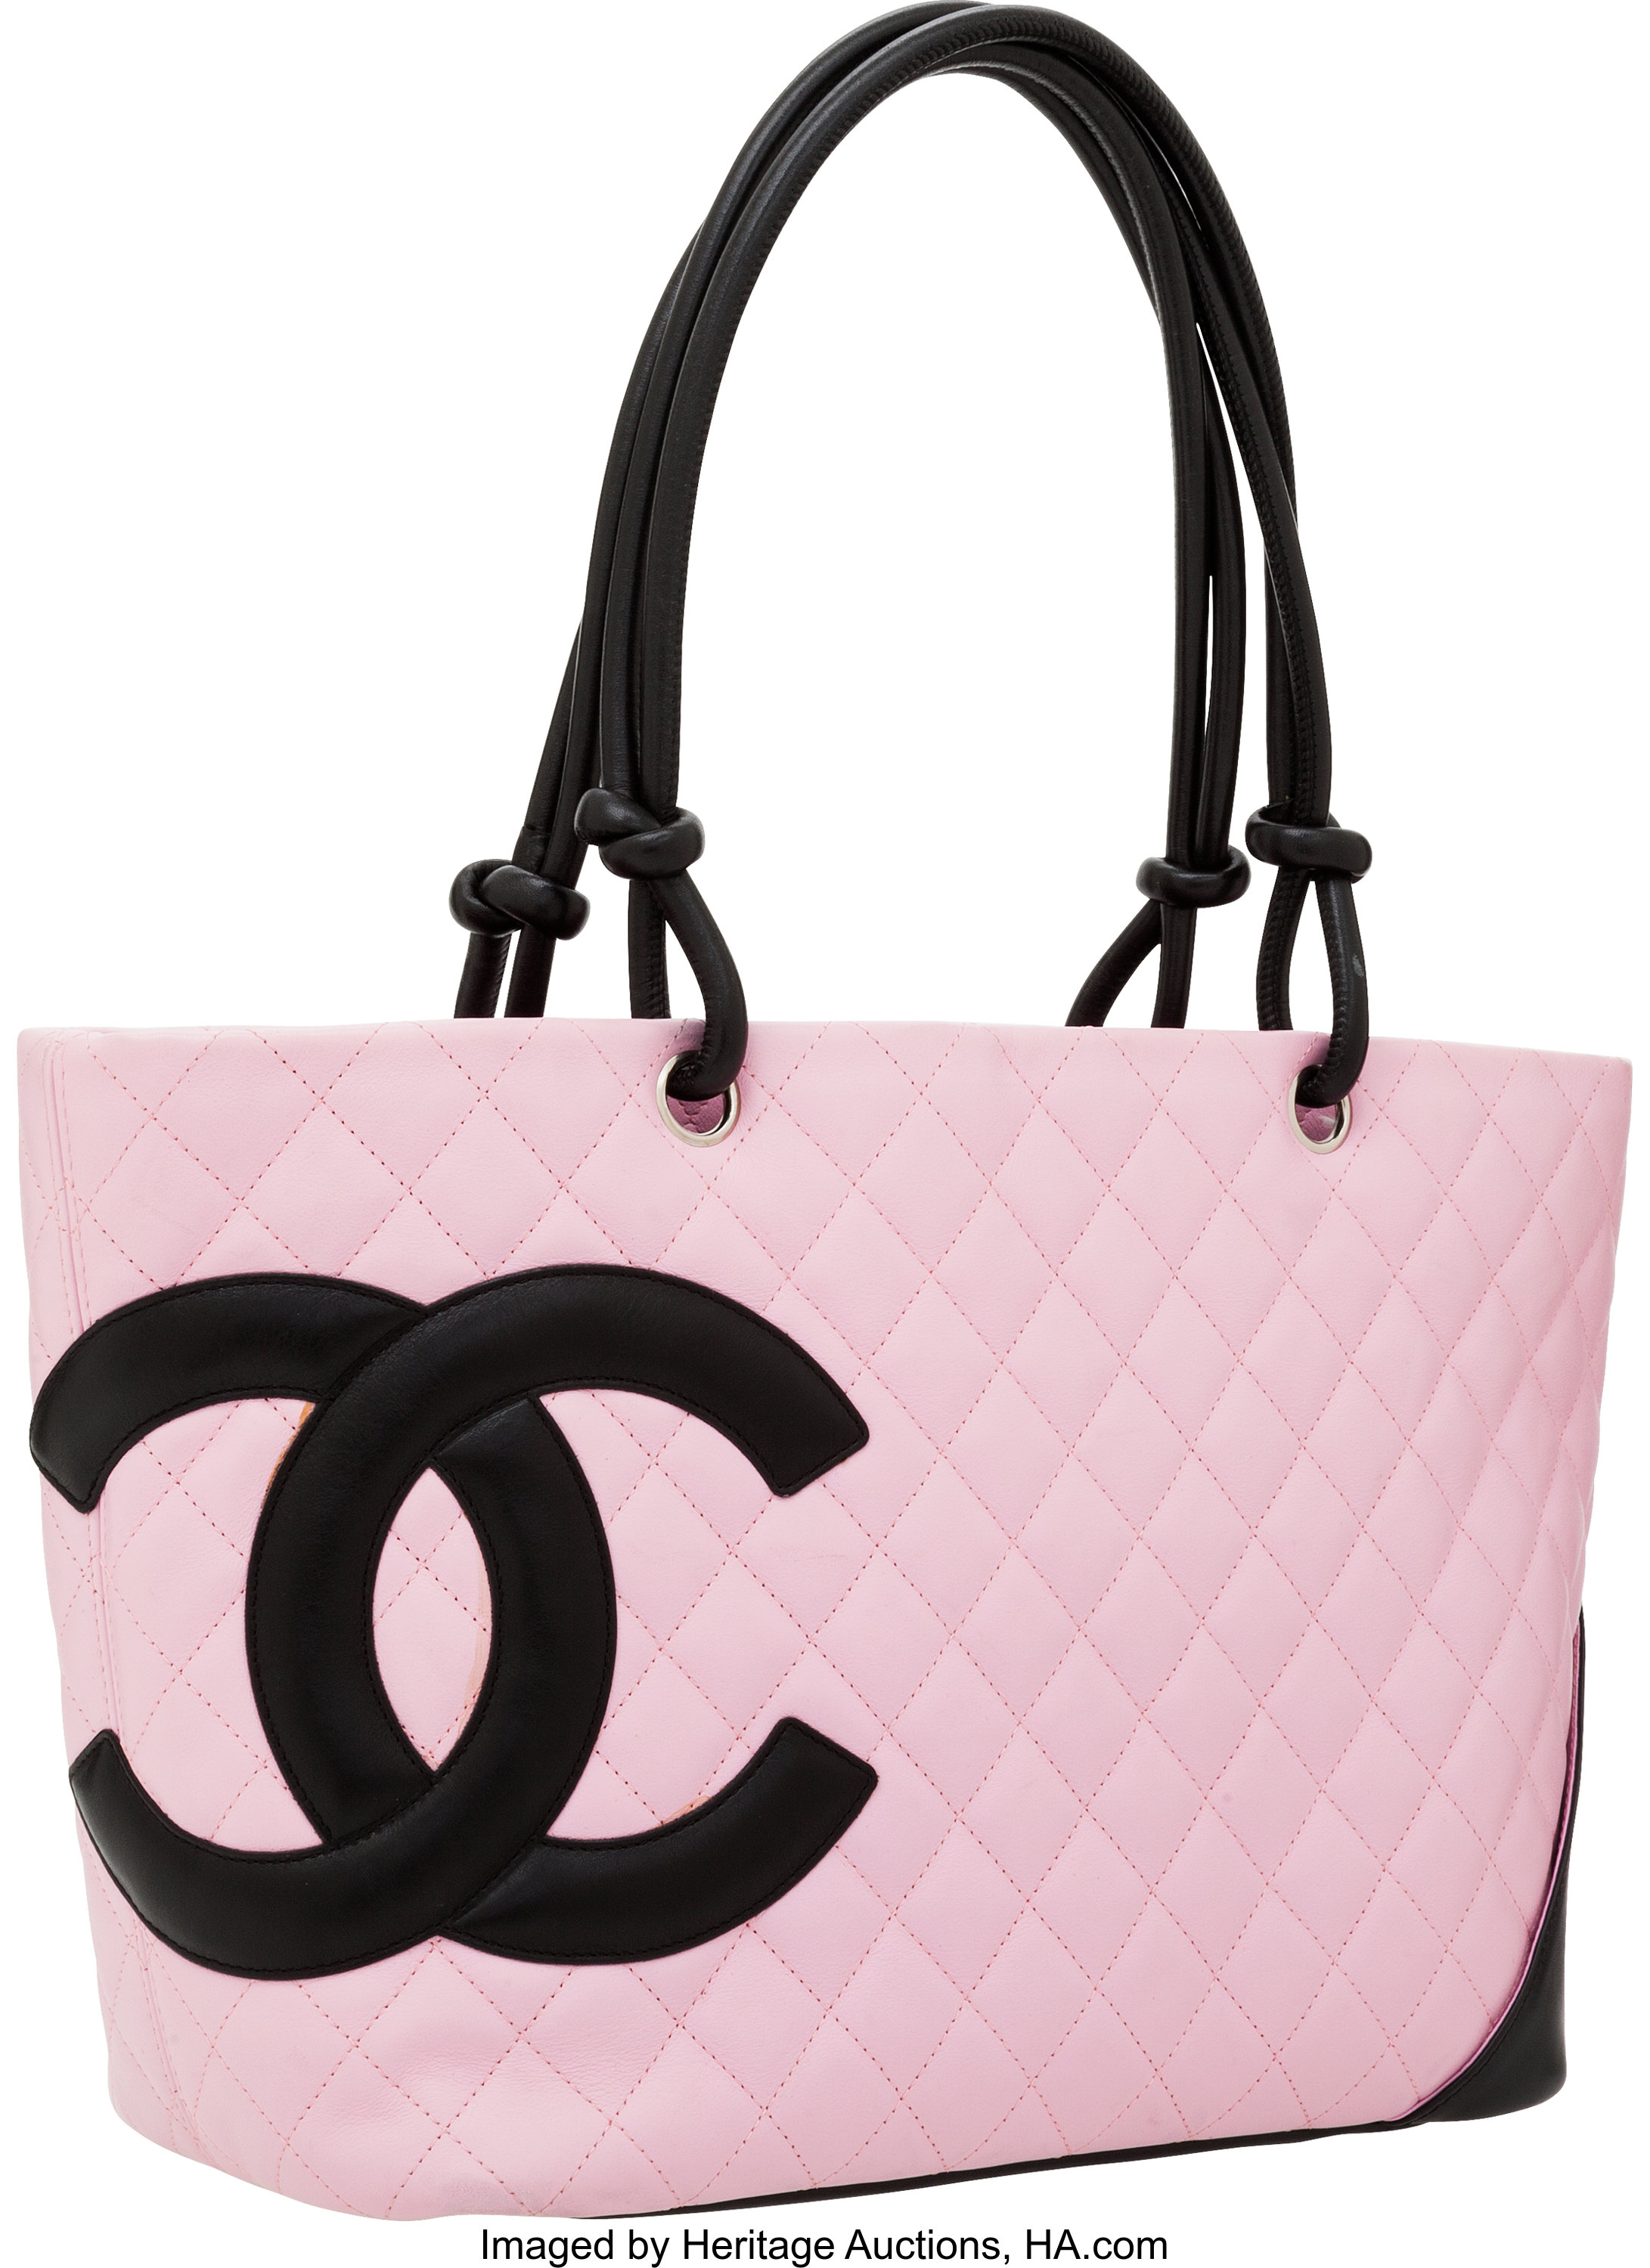 Chanel Pink Lambskin Leather Cambon Large Tote Bag.  Luxury